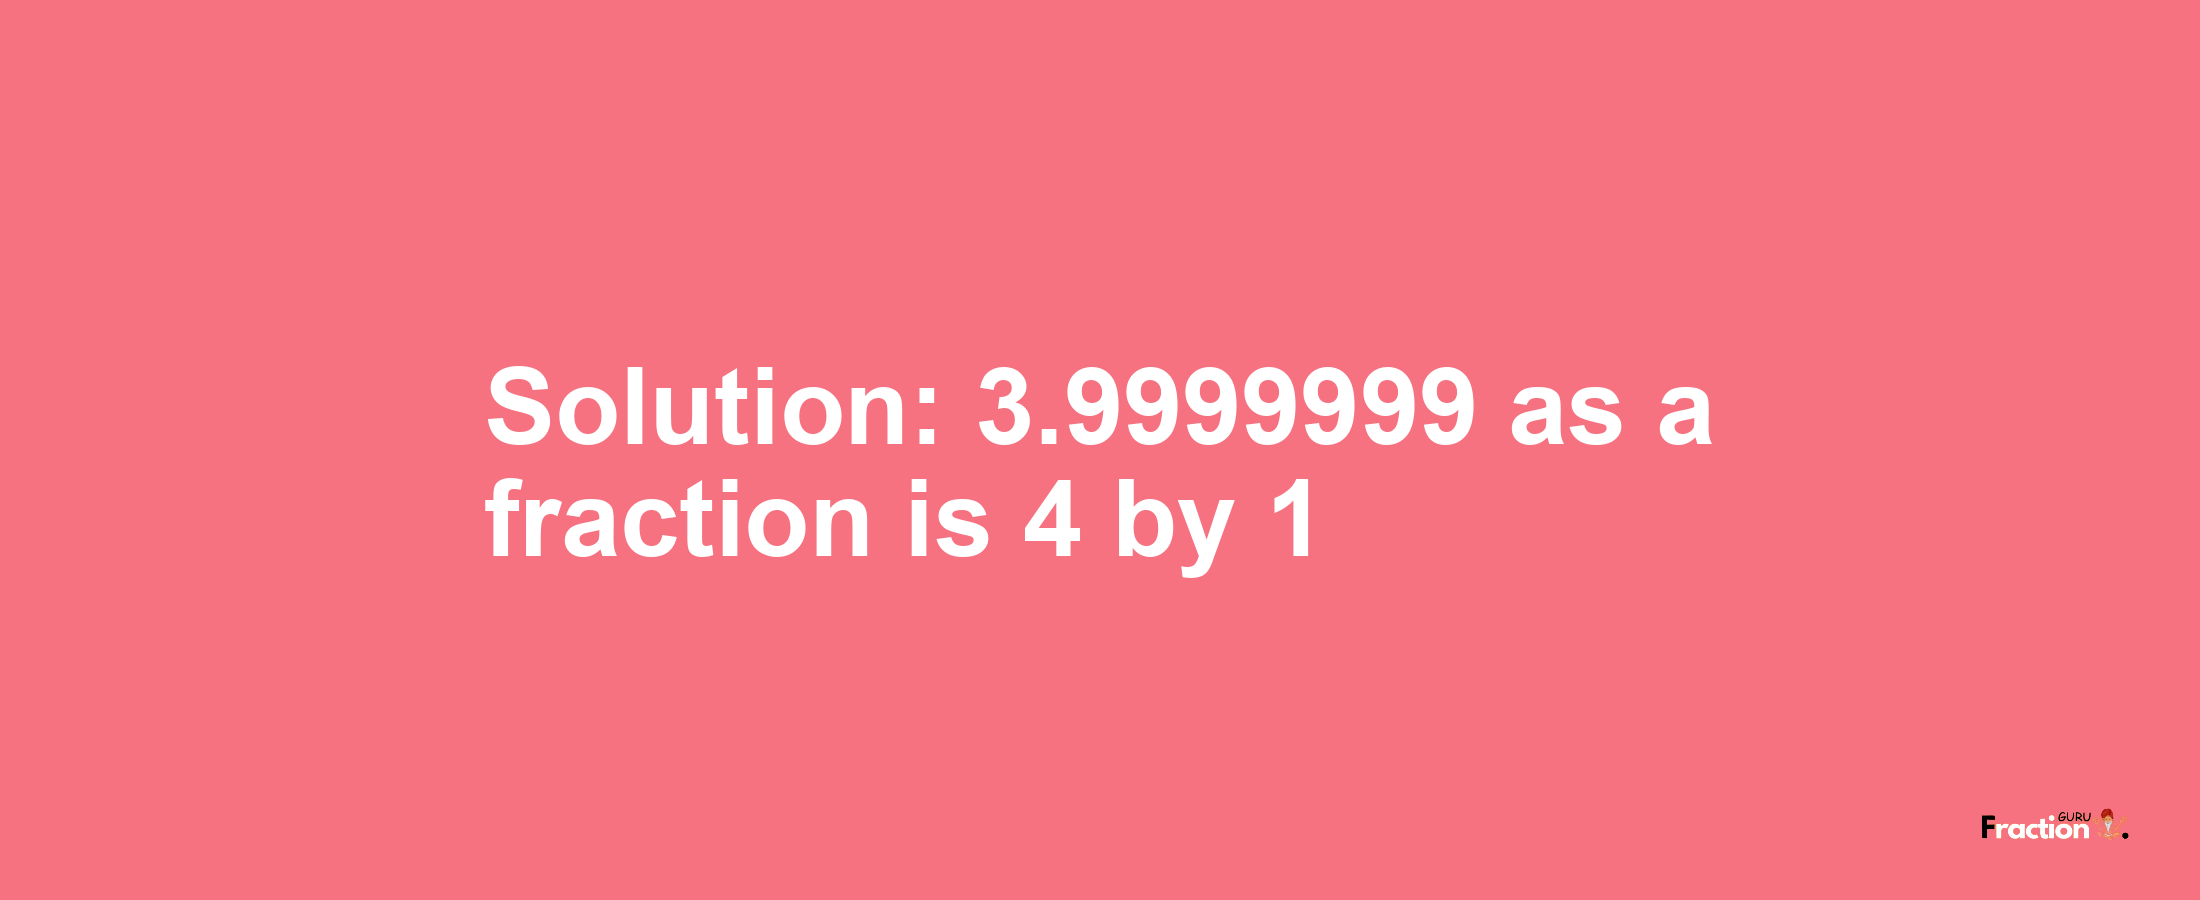 Solution:3.9999999 as a fraction is 4/1